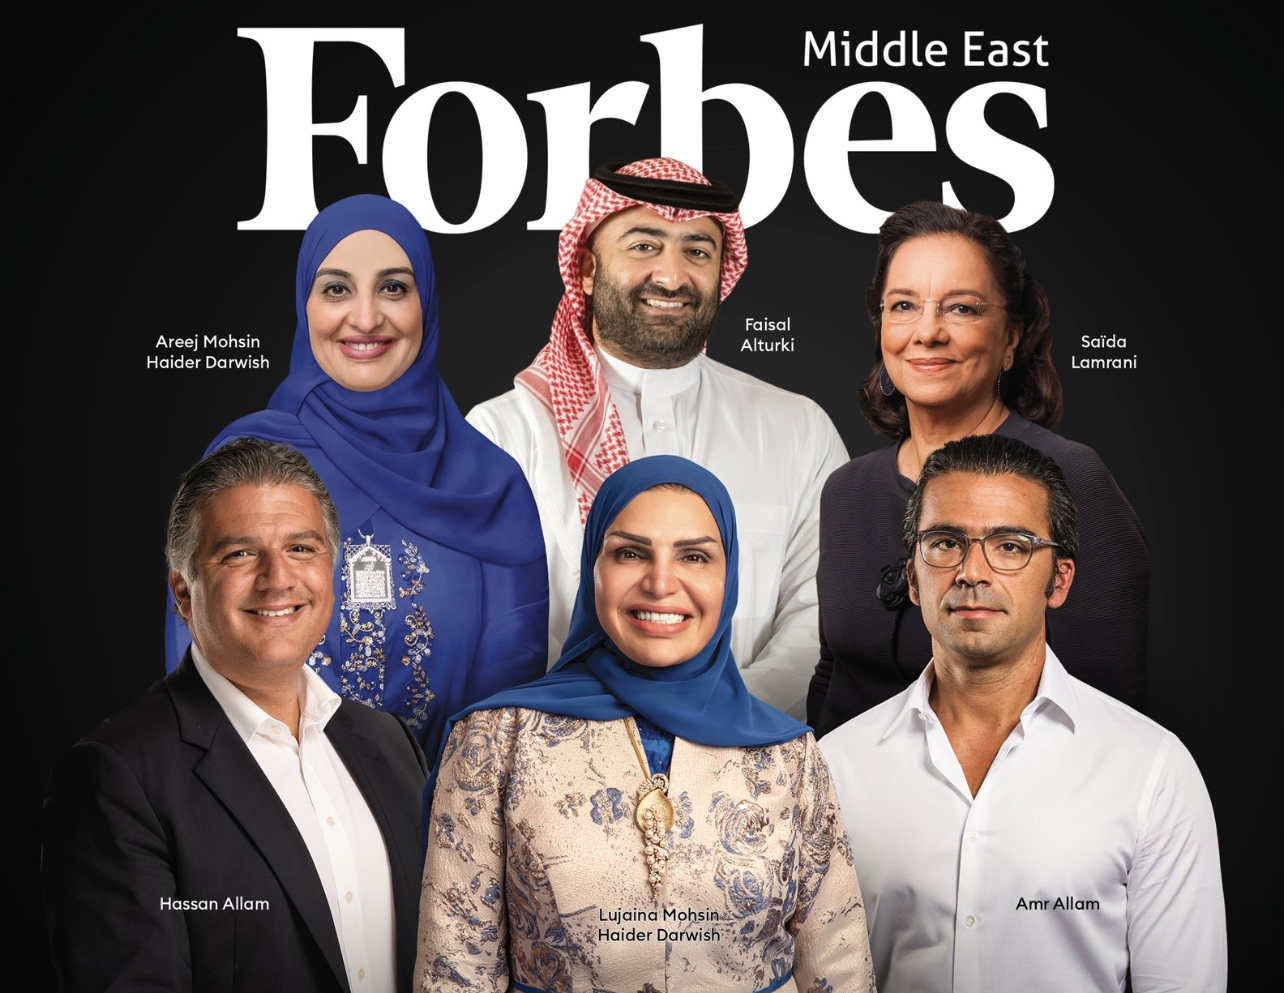 Seven prominent Qatari businesses secure spots on Forbes 100 list